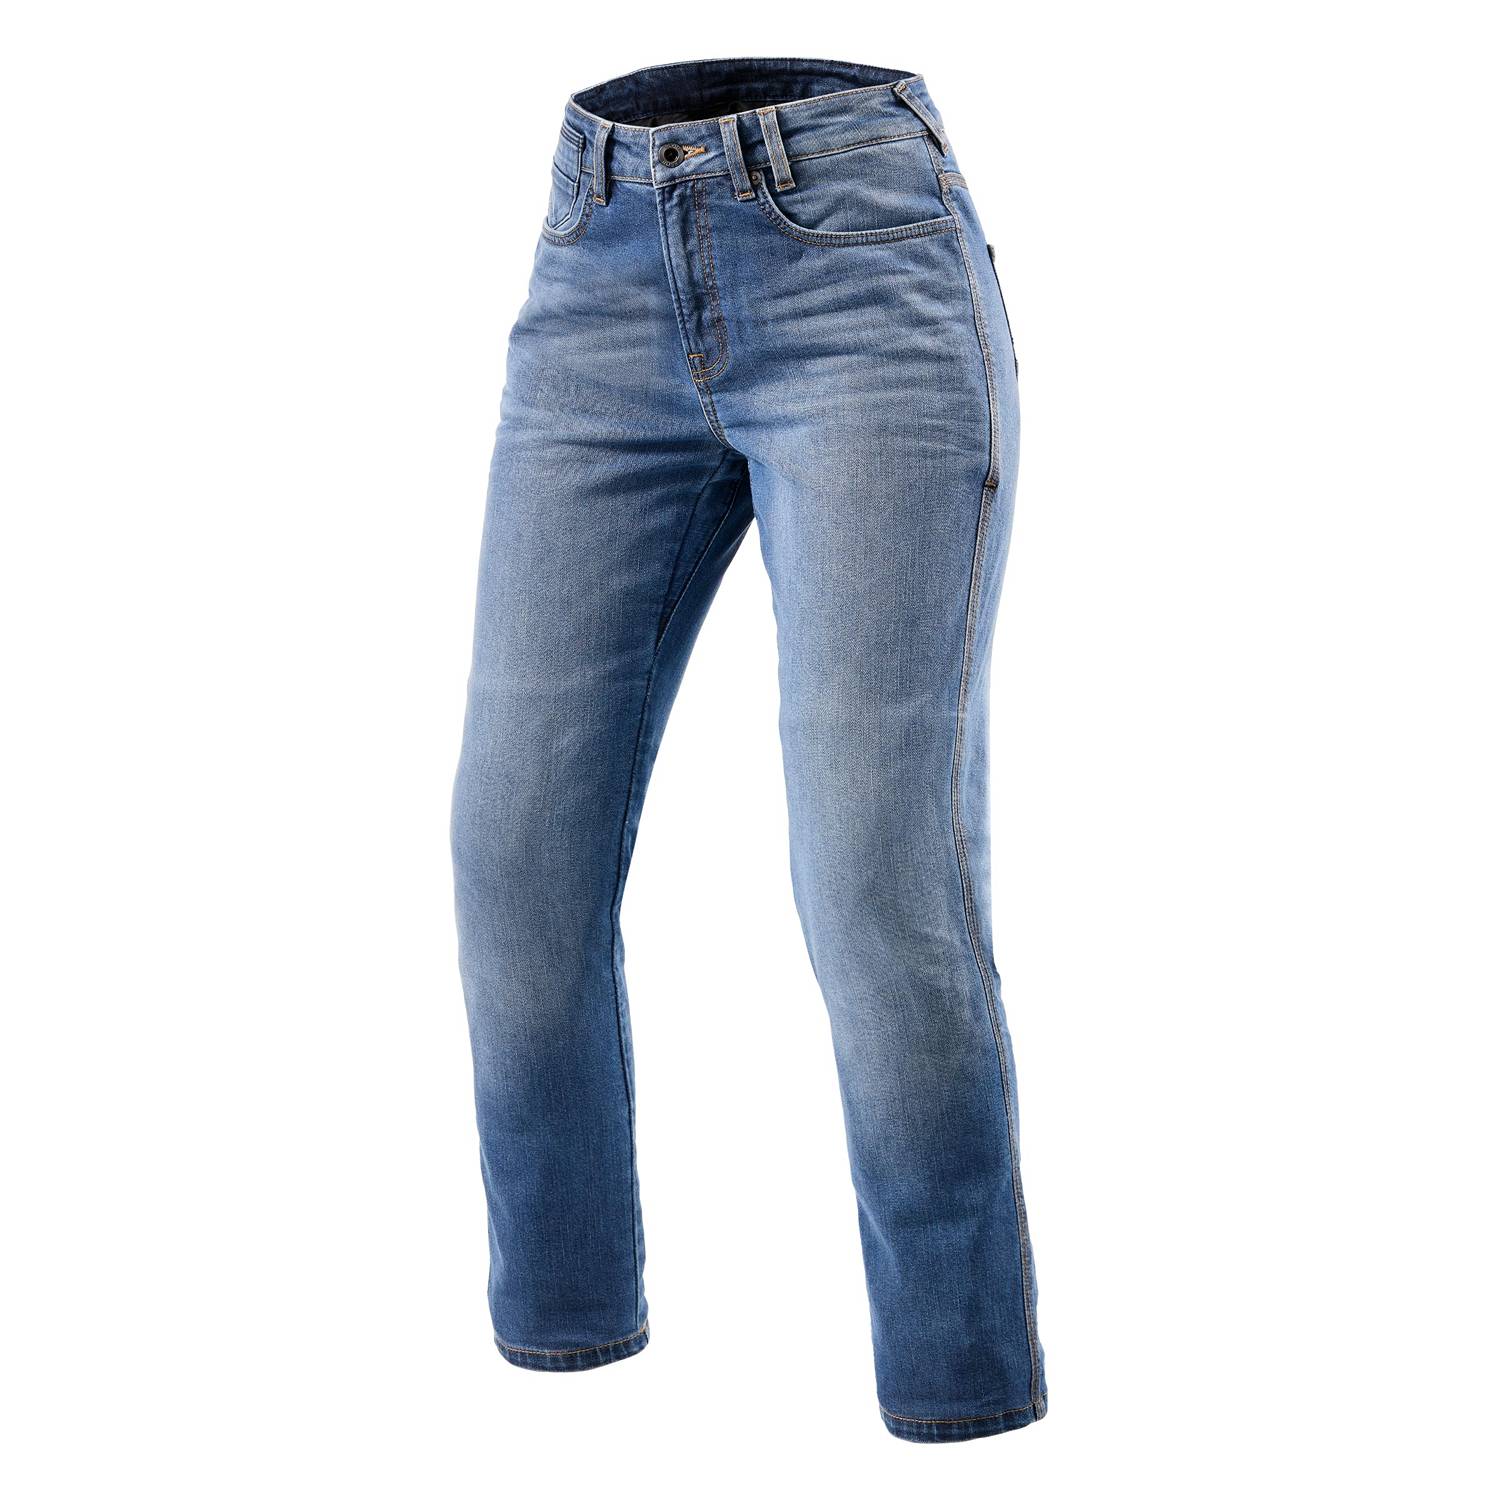 Image of REV'IT! Jeans Victoria 2 Ladies SF Classic Blue Used Motorcycle Jeans Size L32/W24 ID 8700001342797